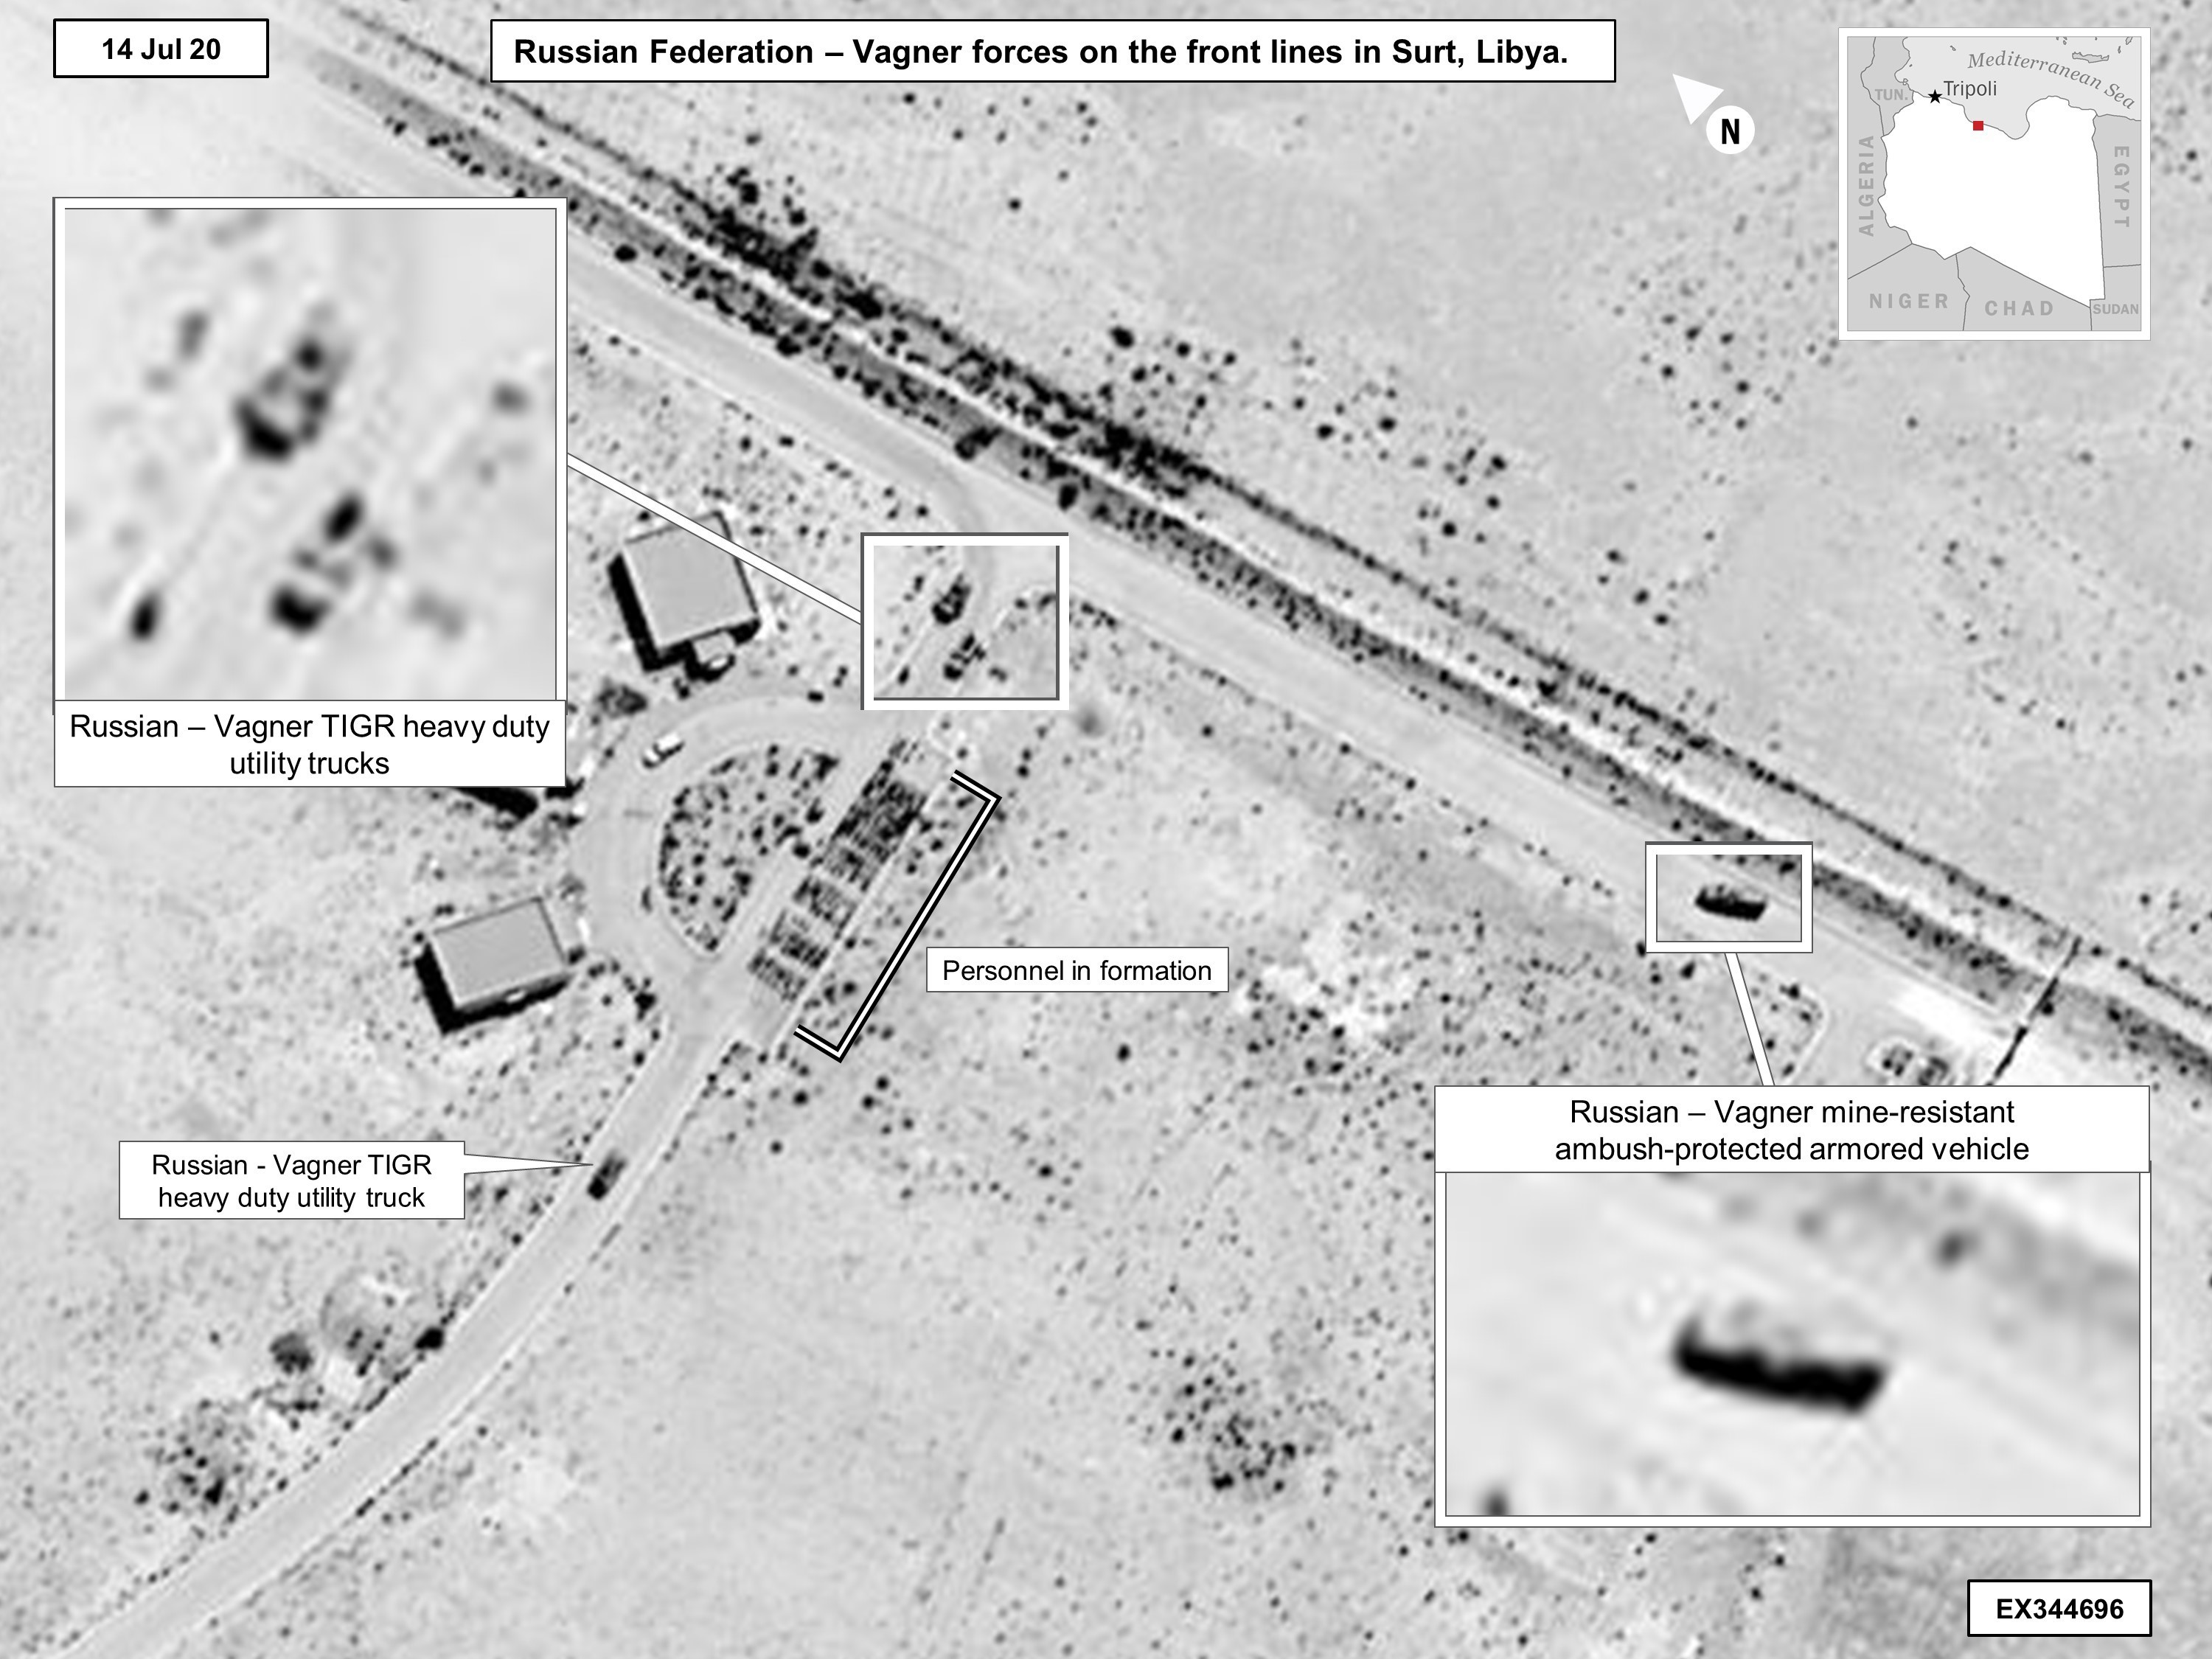 This 14 July, 2020, satellite image released by the US reportedly shows Wagner utility trucks and Russian mine-resistant, ambush-protected armoured vehicles in Sirte, Libya (AFP)